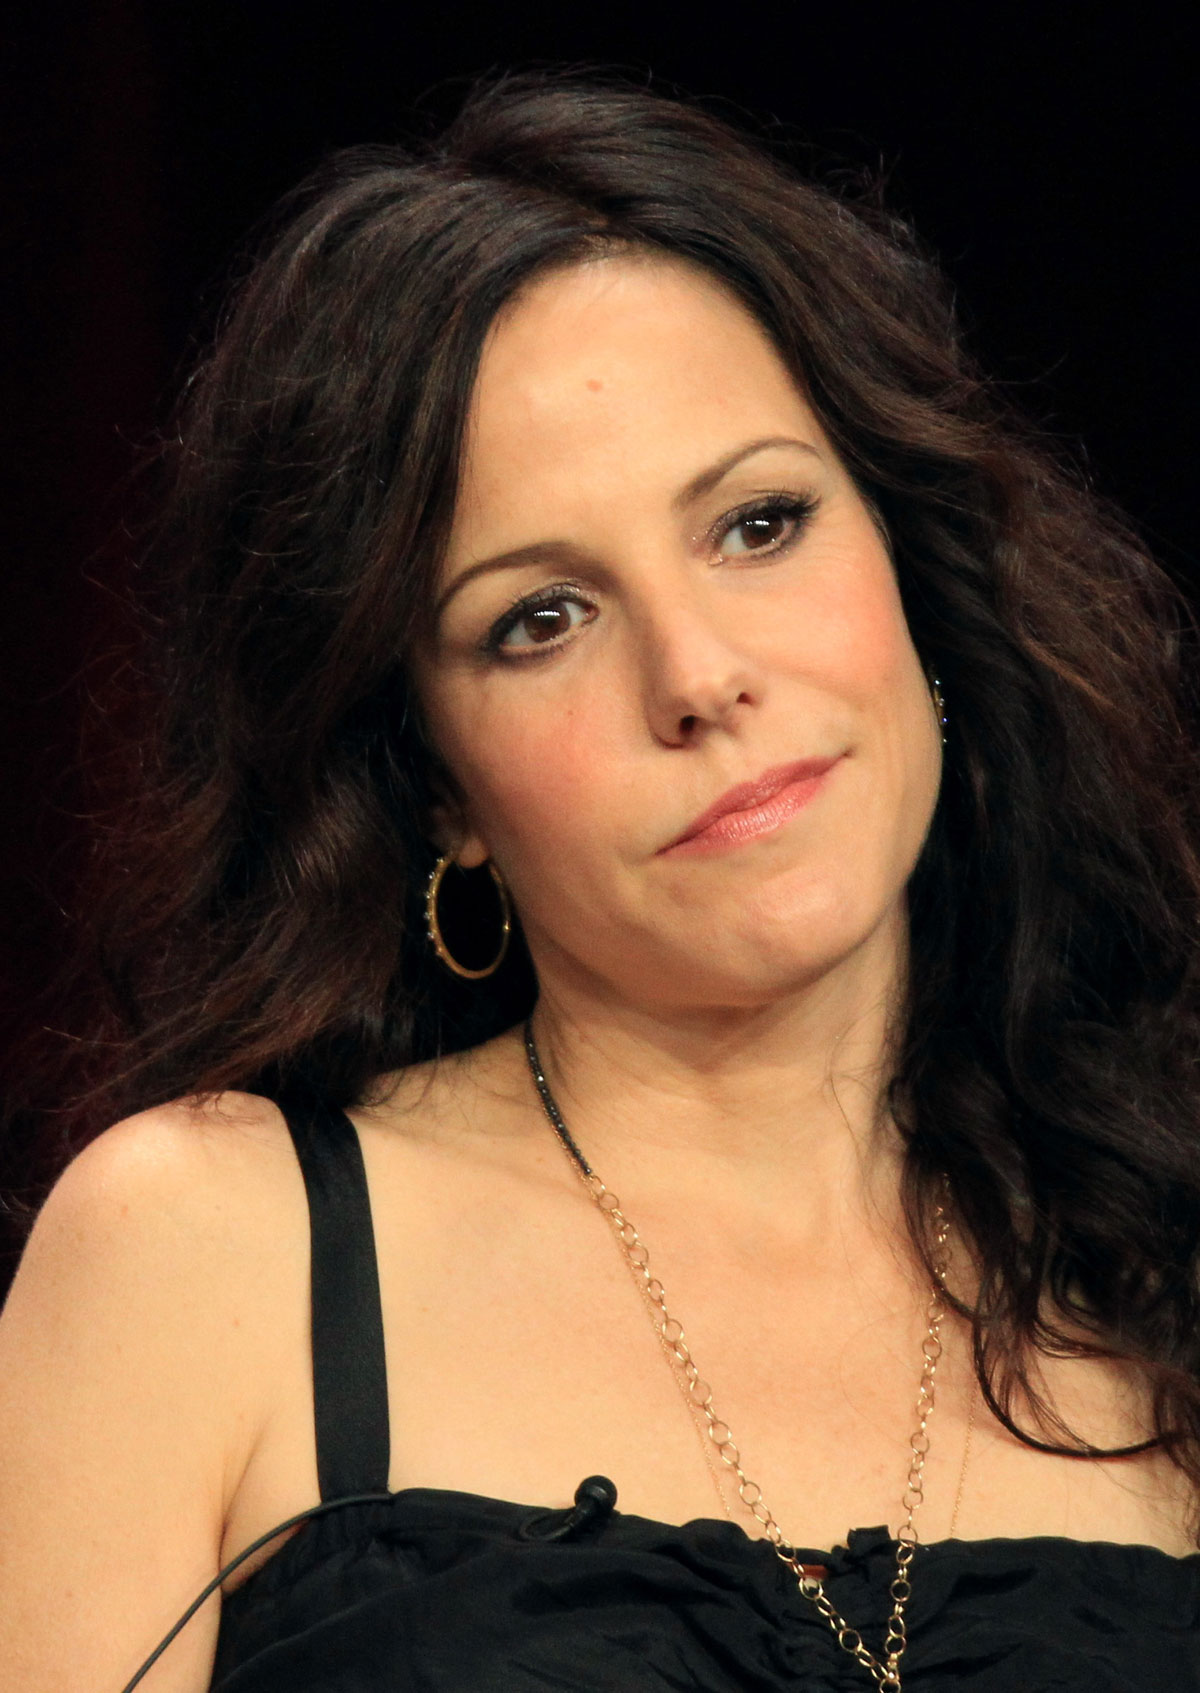 Mary-Louise Parker Net Worth, Age, Height, Husband, Profile, Movies